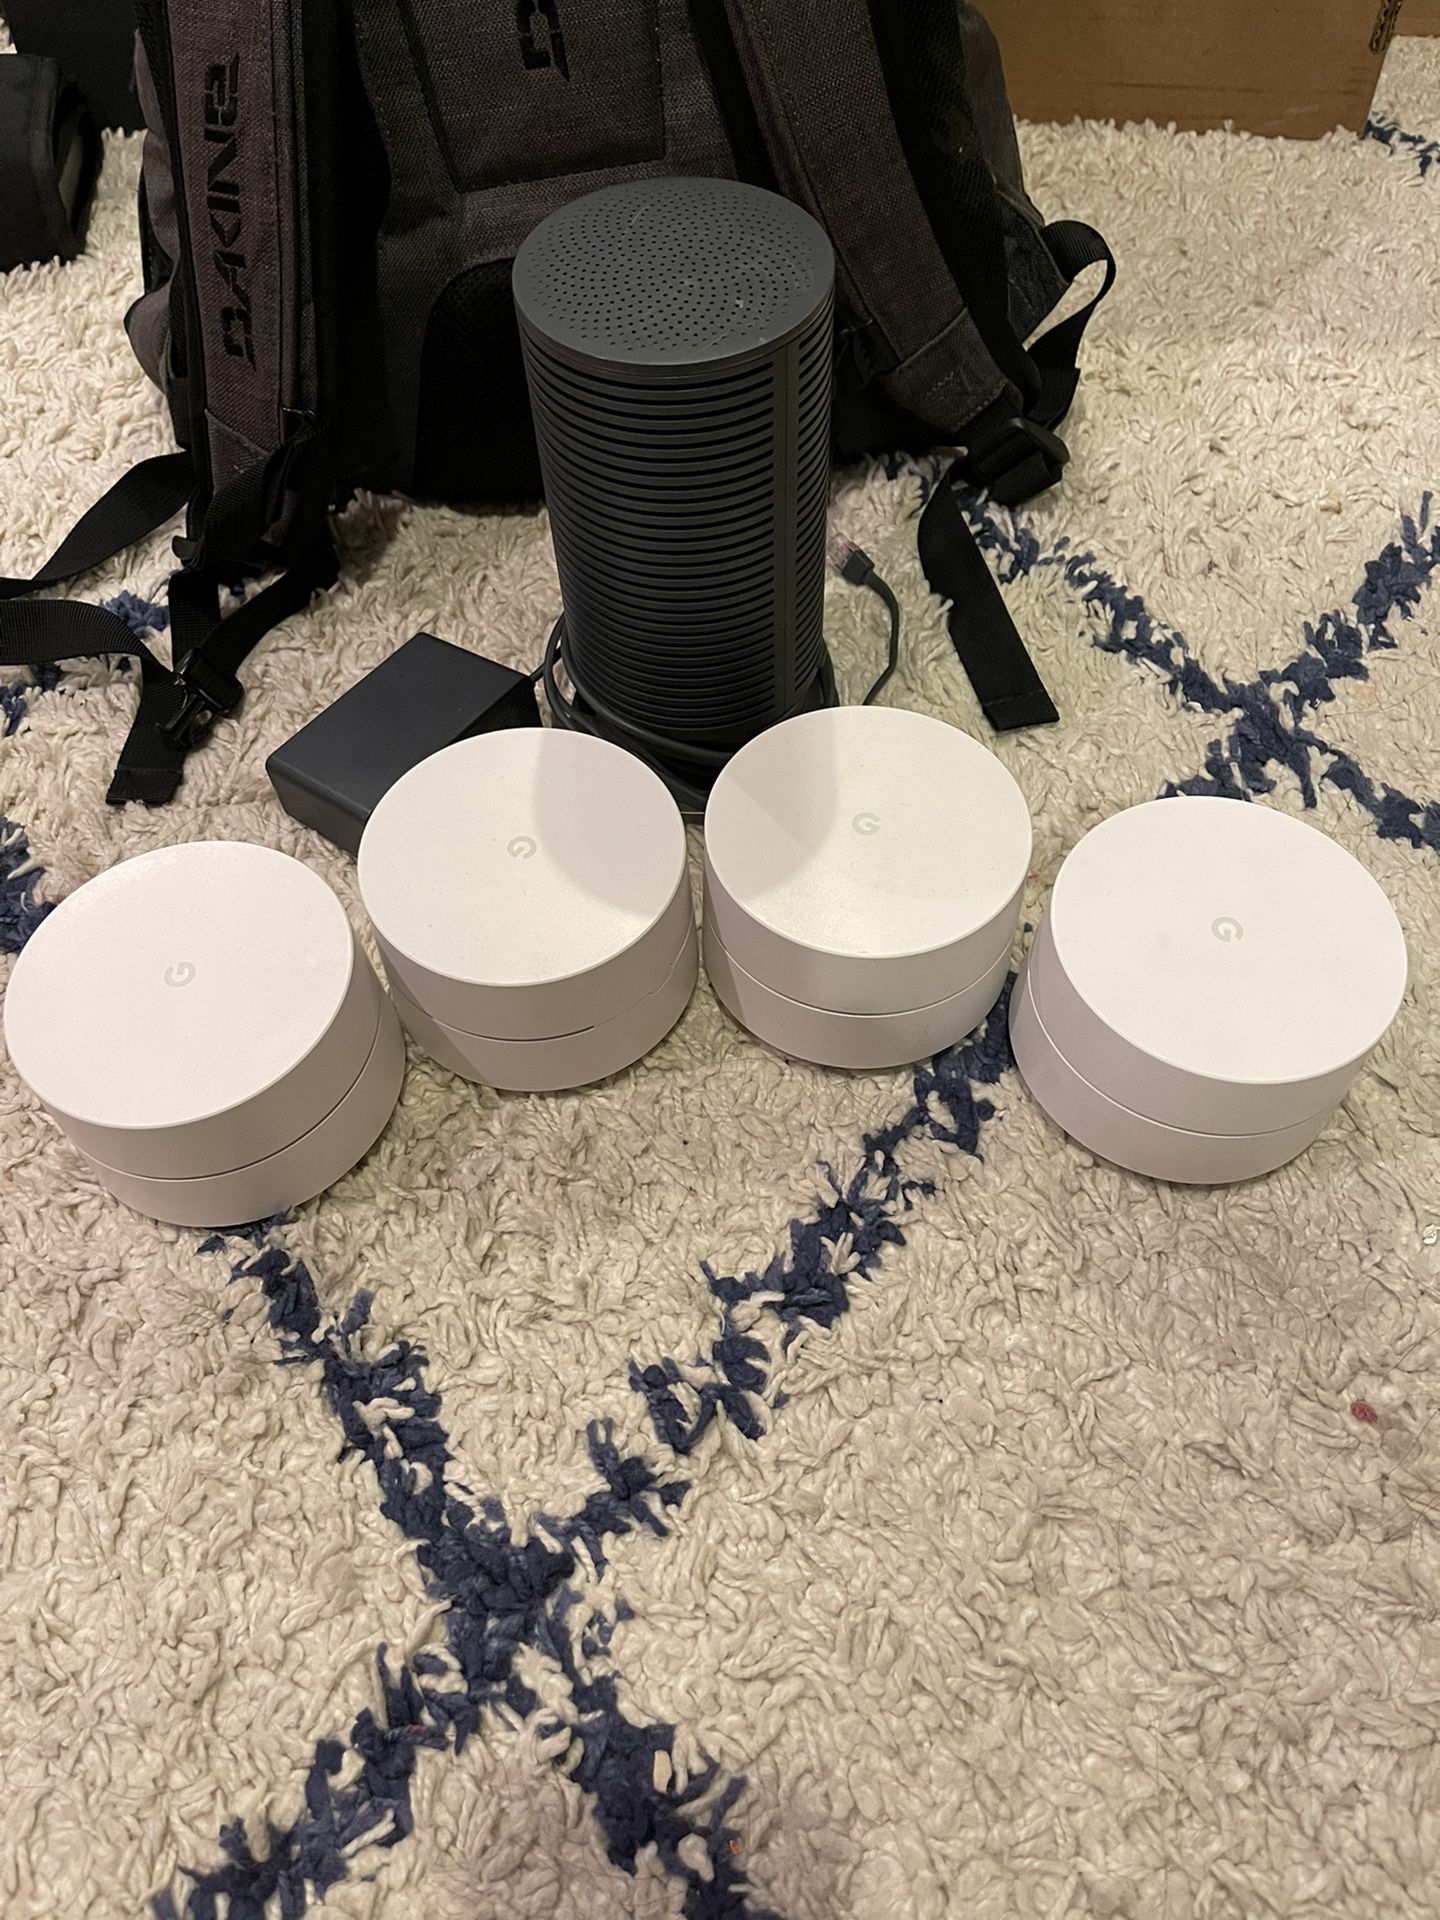 Google Wifi System With TP Link onHub Router